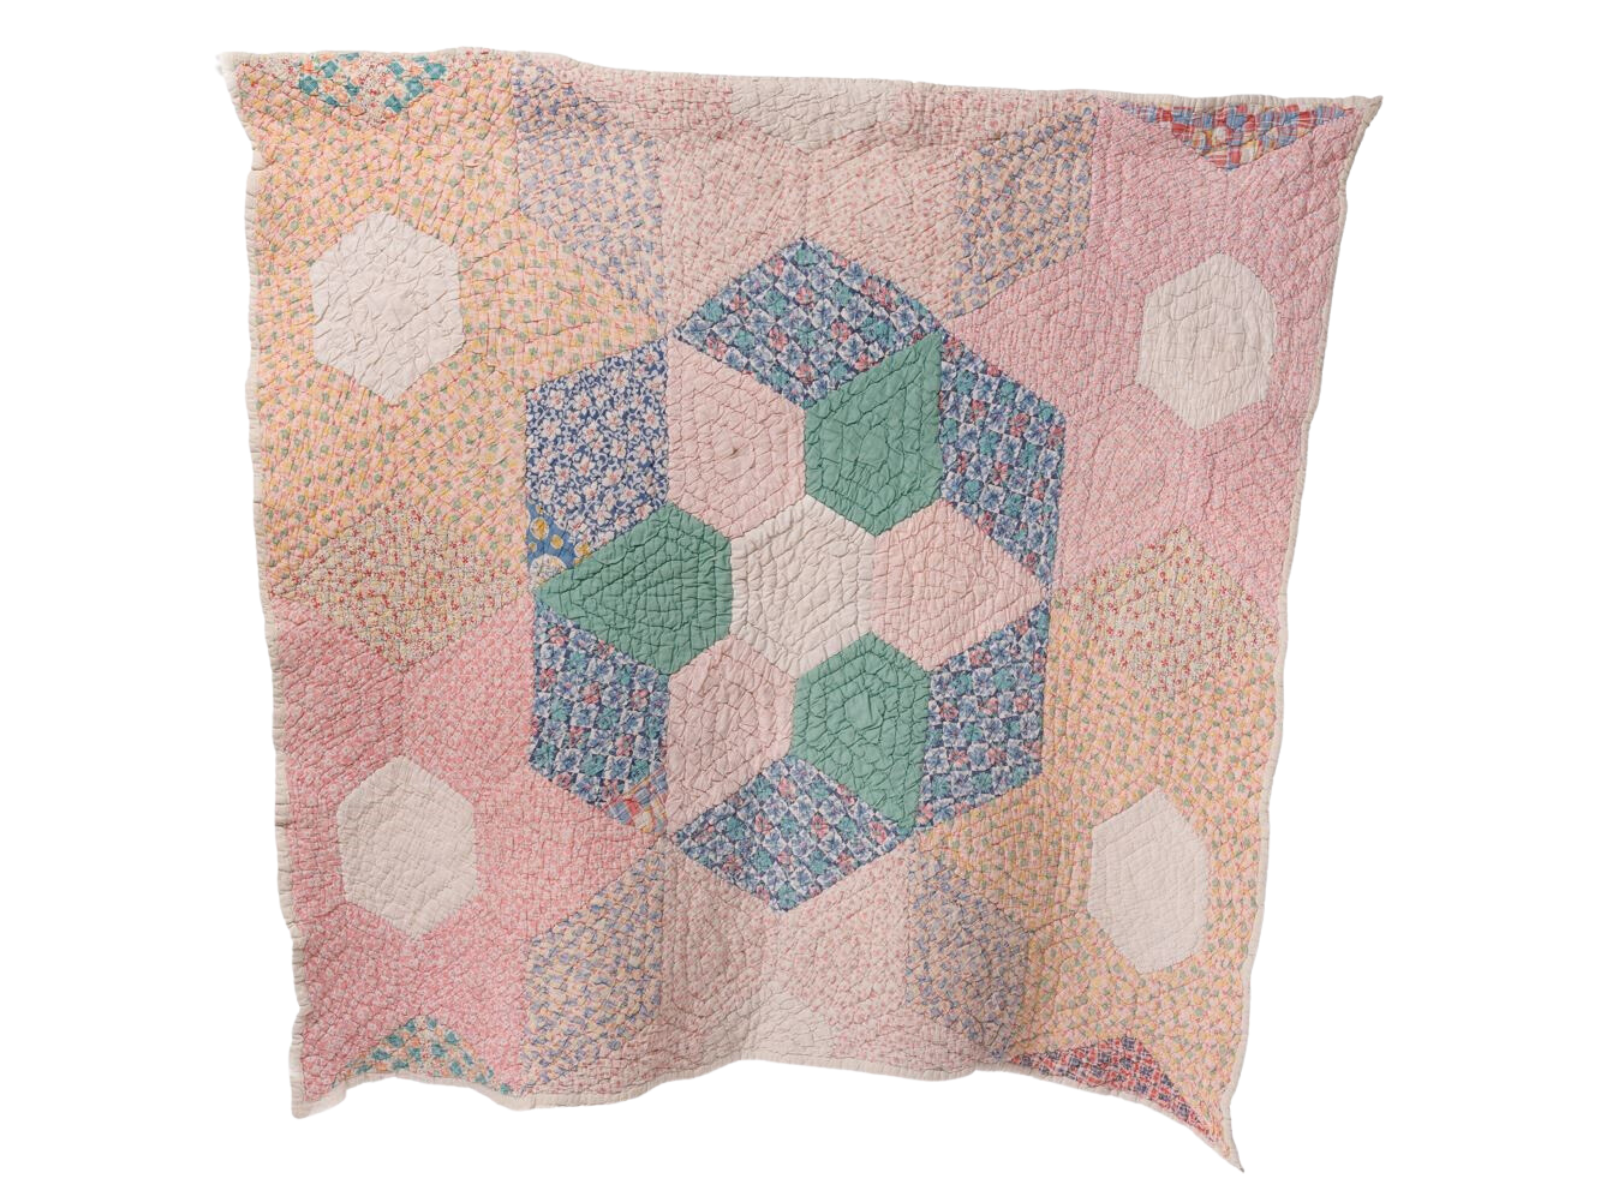 A quilt stitched of pastel pink, orange, and cream fabric with an accent portion in the middle in blues and greens.